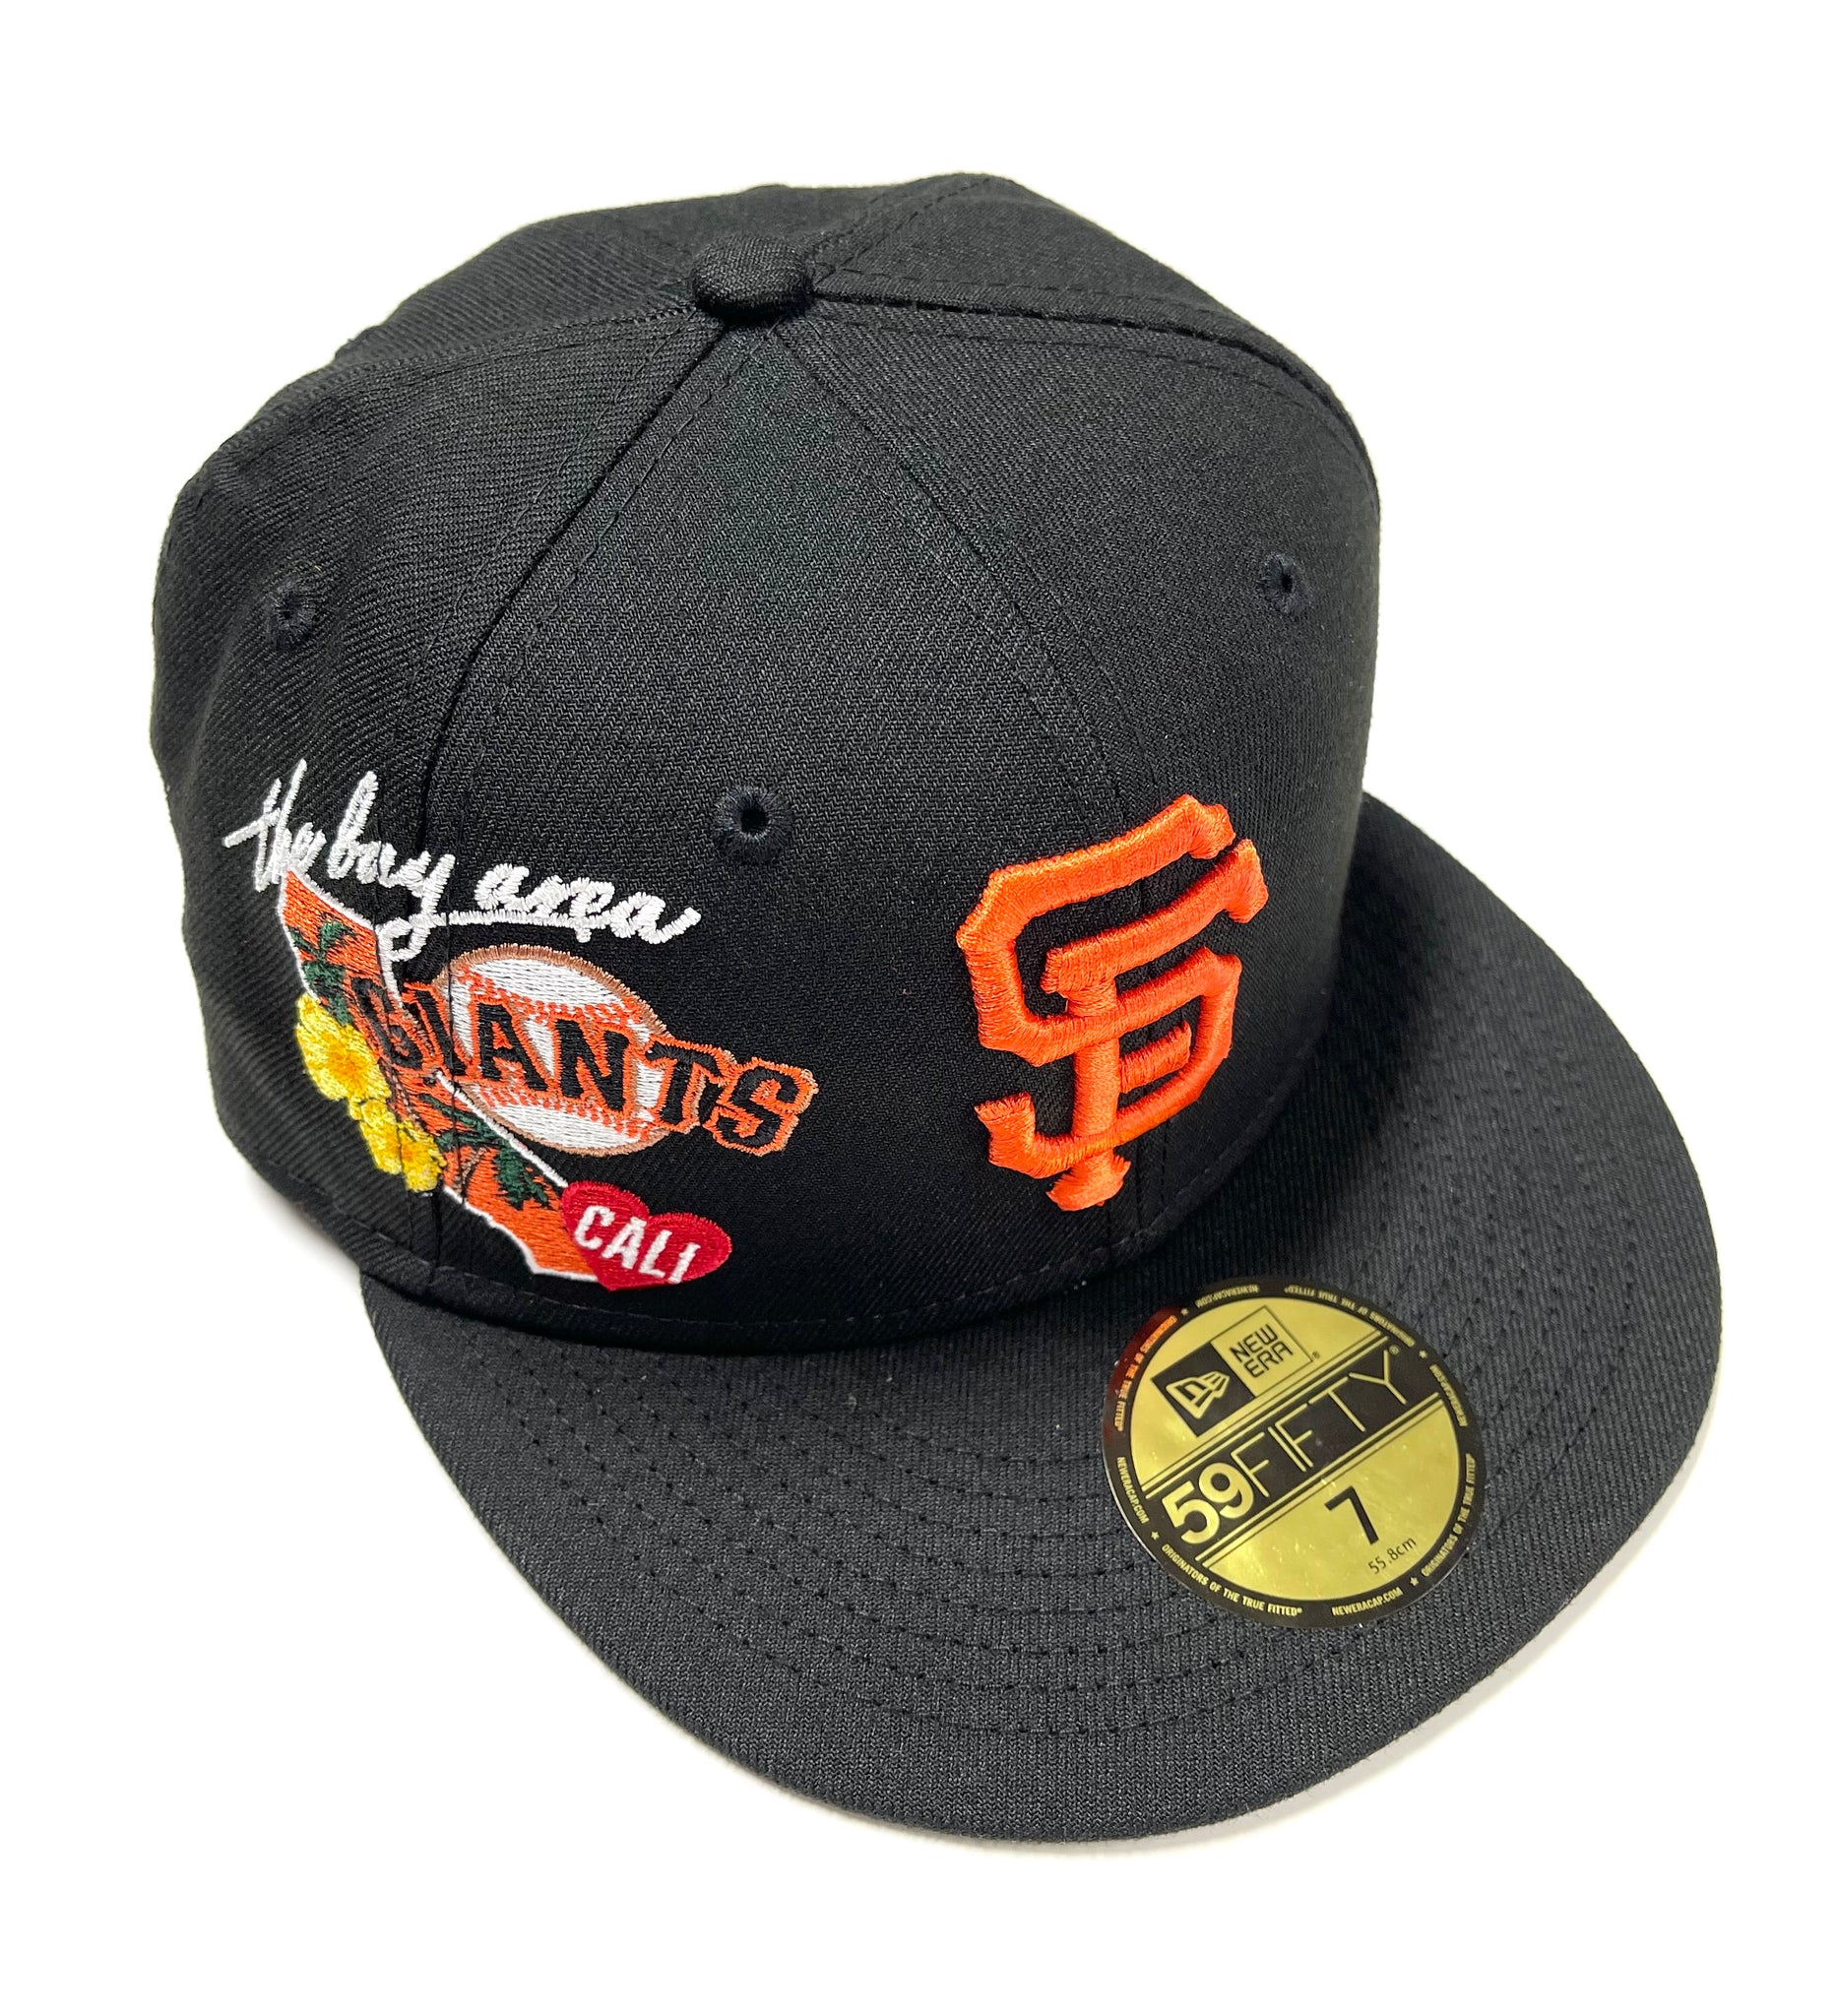 New Era On-Field Fitted Baseball Cap - San Francisco Giants - Size